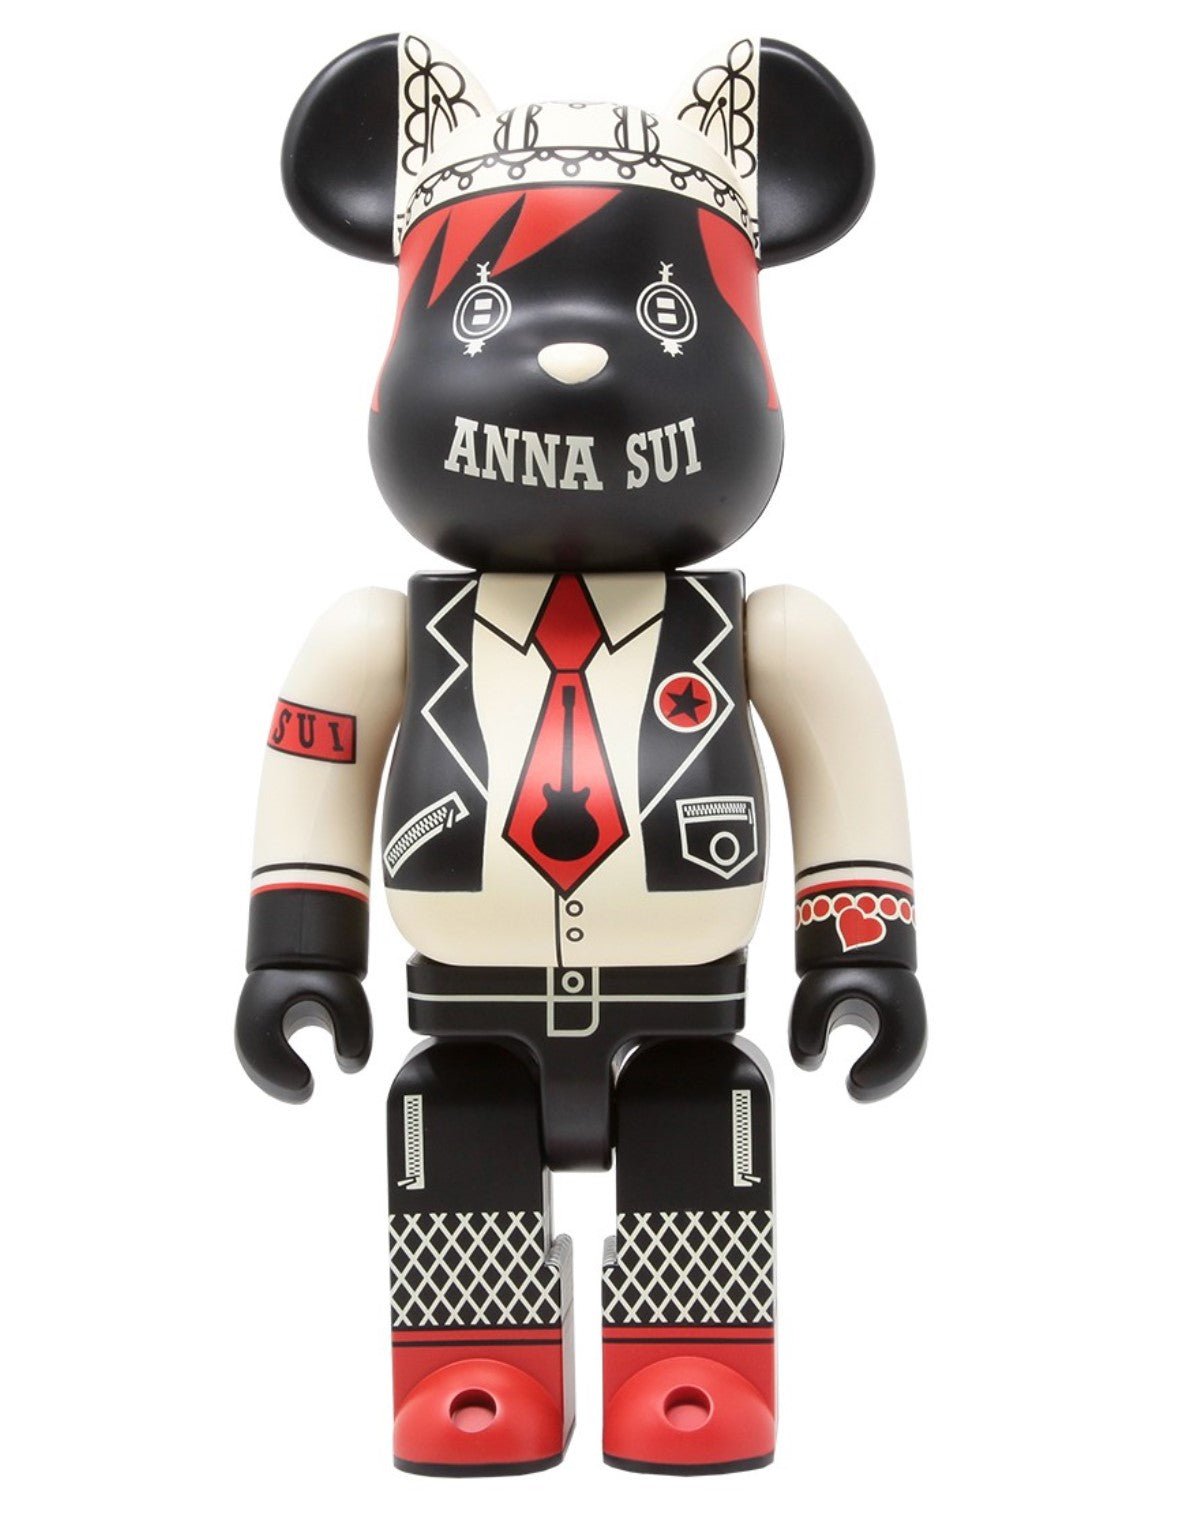 Anna Sui- Red/Beige 400% Be@rbrick – Sprayed Paint Art Collection